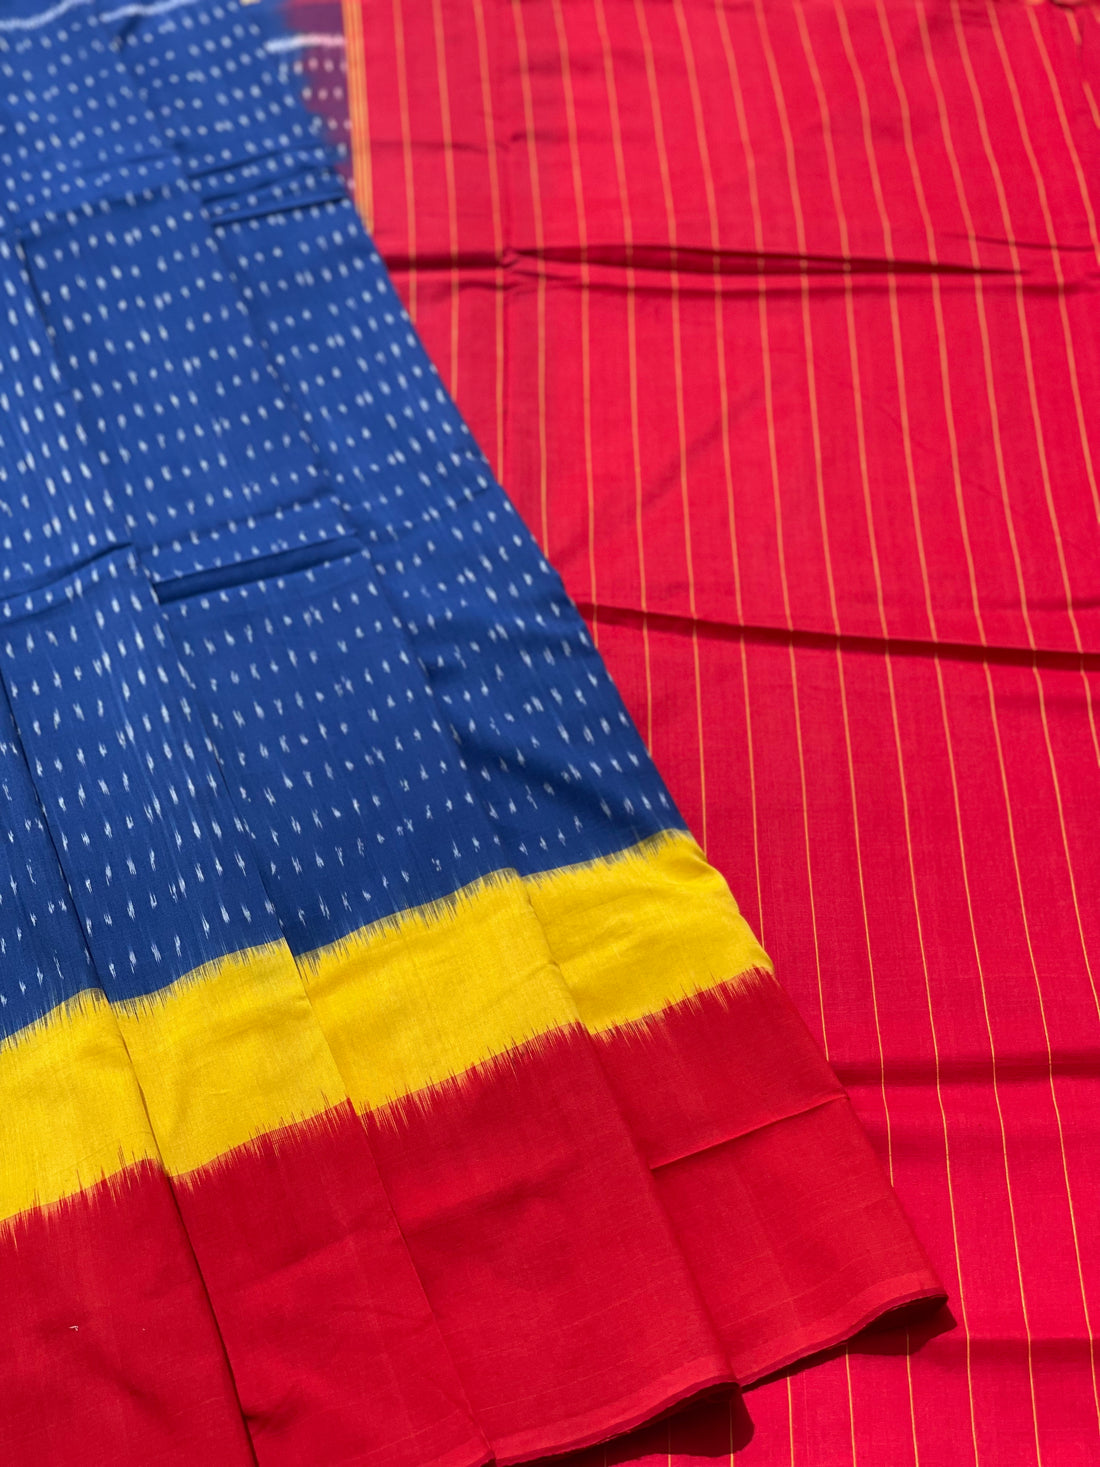 Beautiful weft ikkat cotton Saree with in yellow red and blue